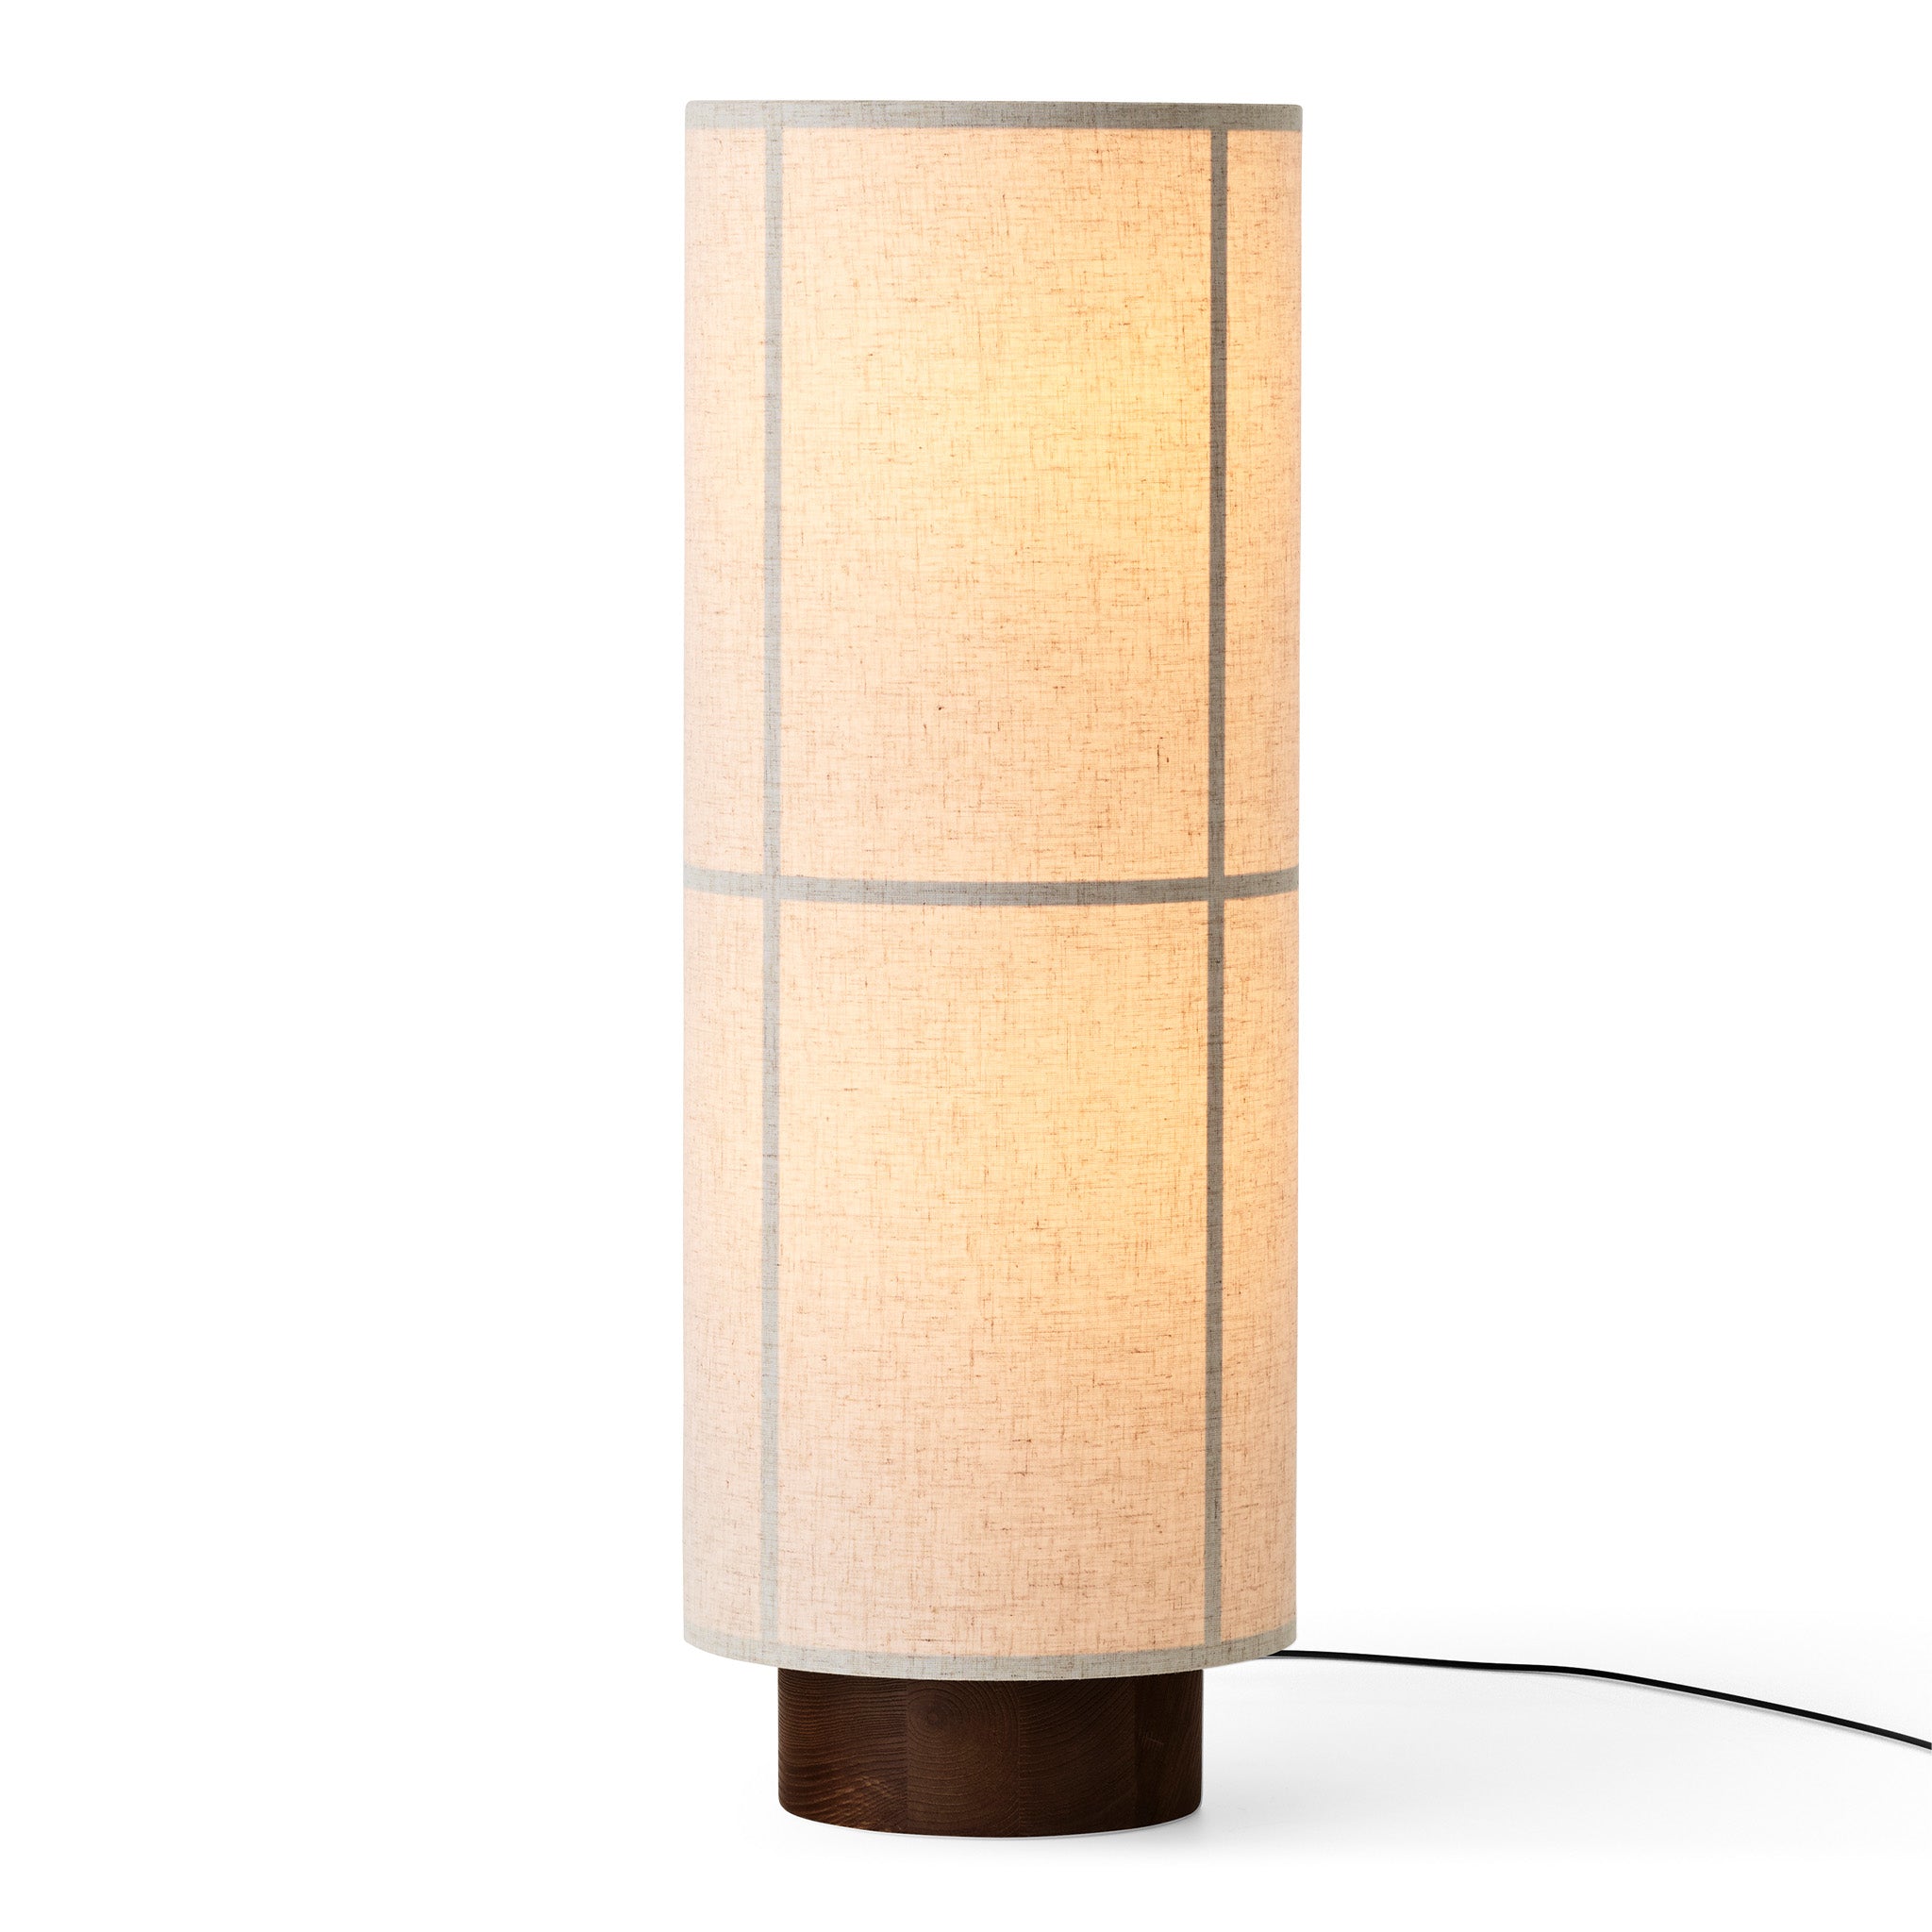 Hashira Floor Lamp by Norm Architects